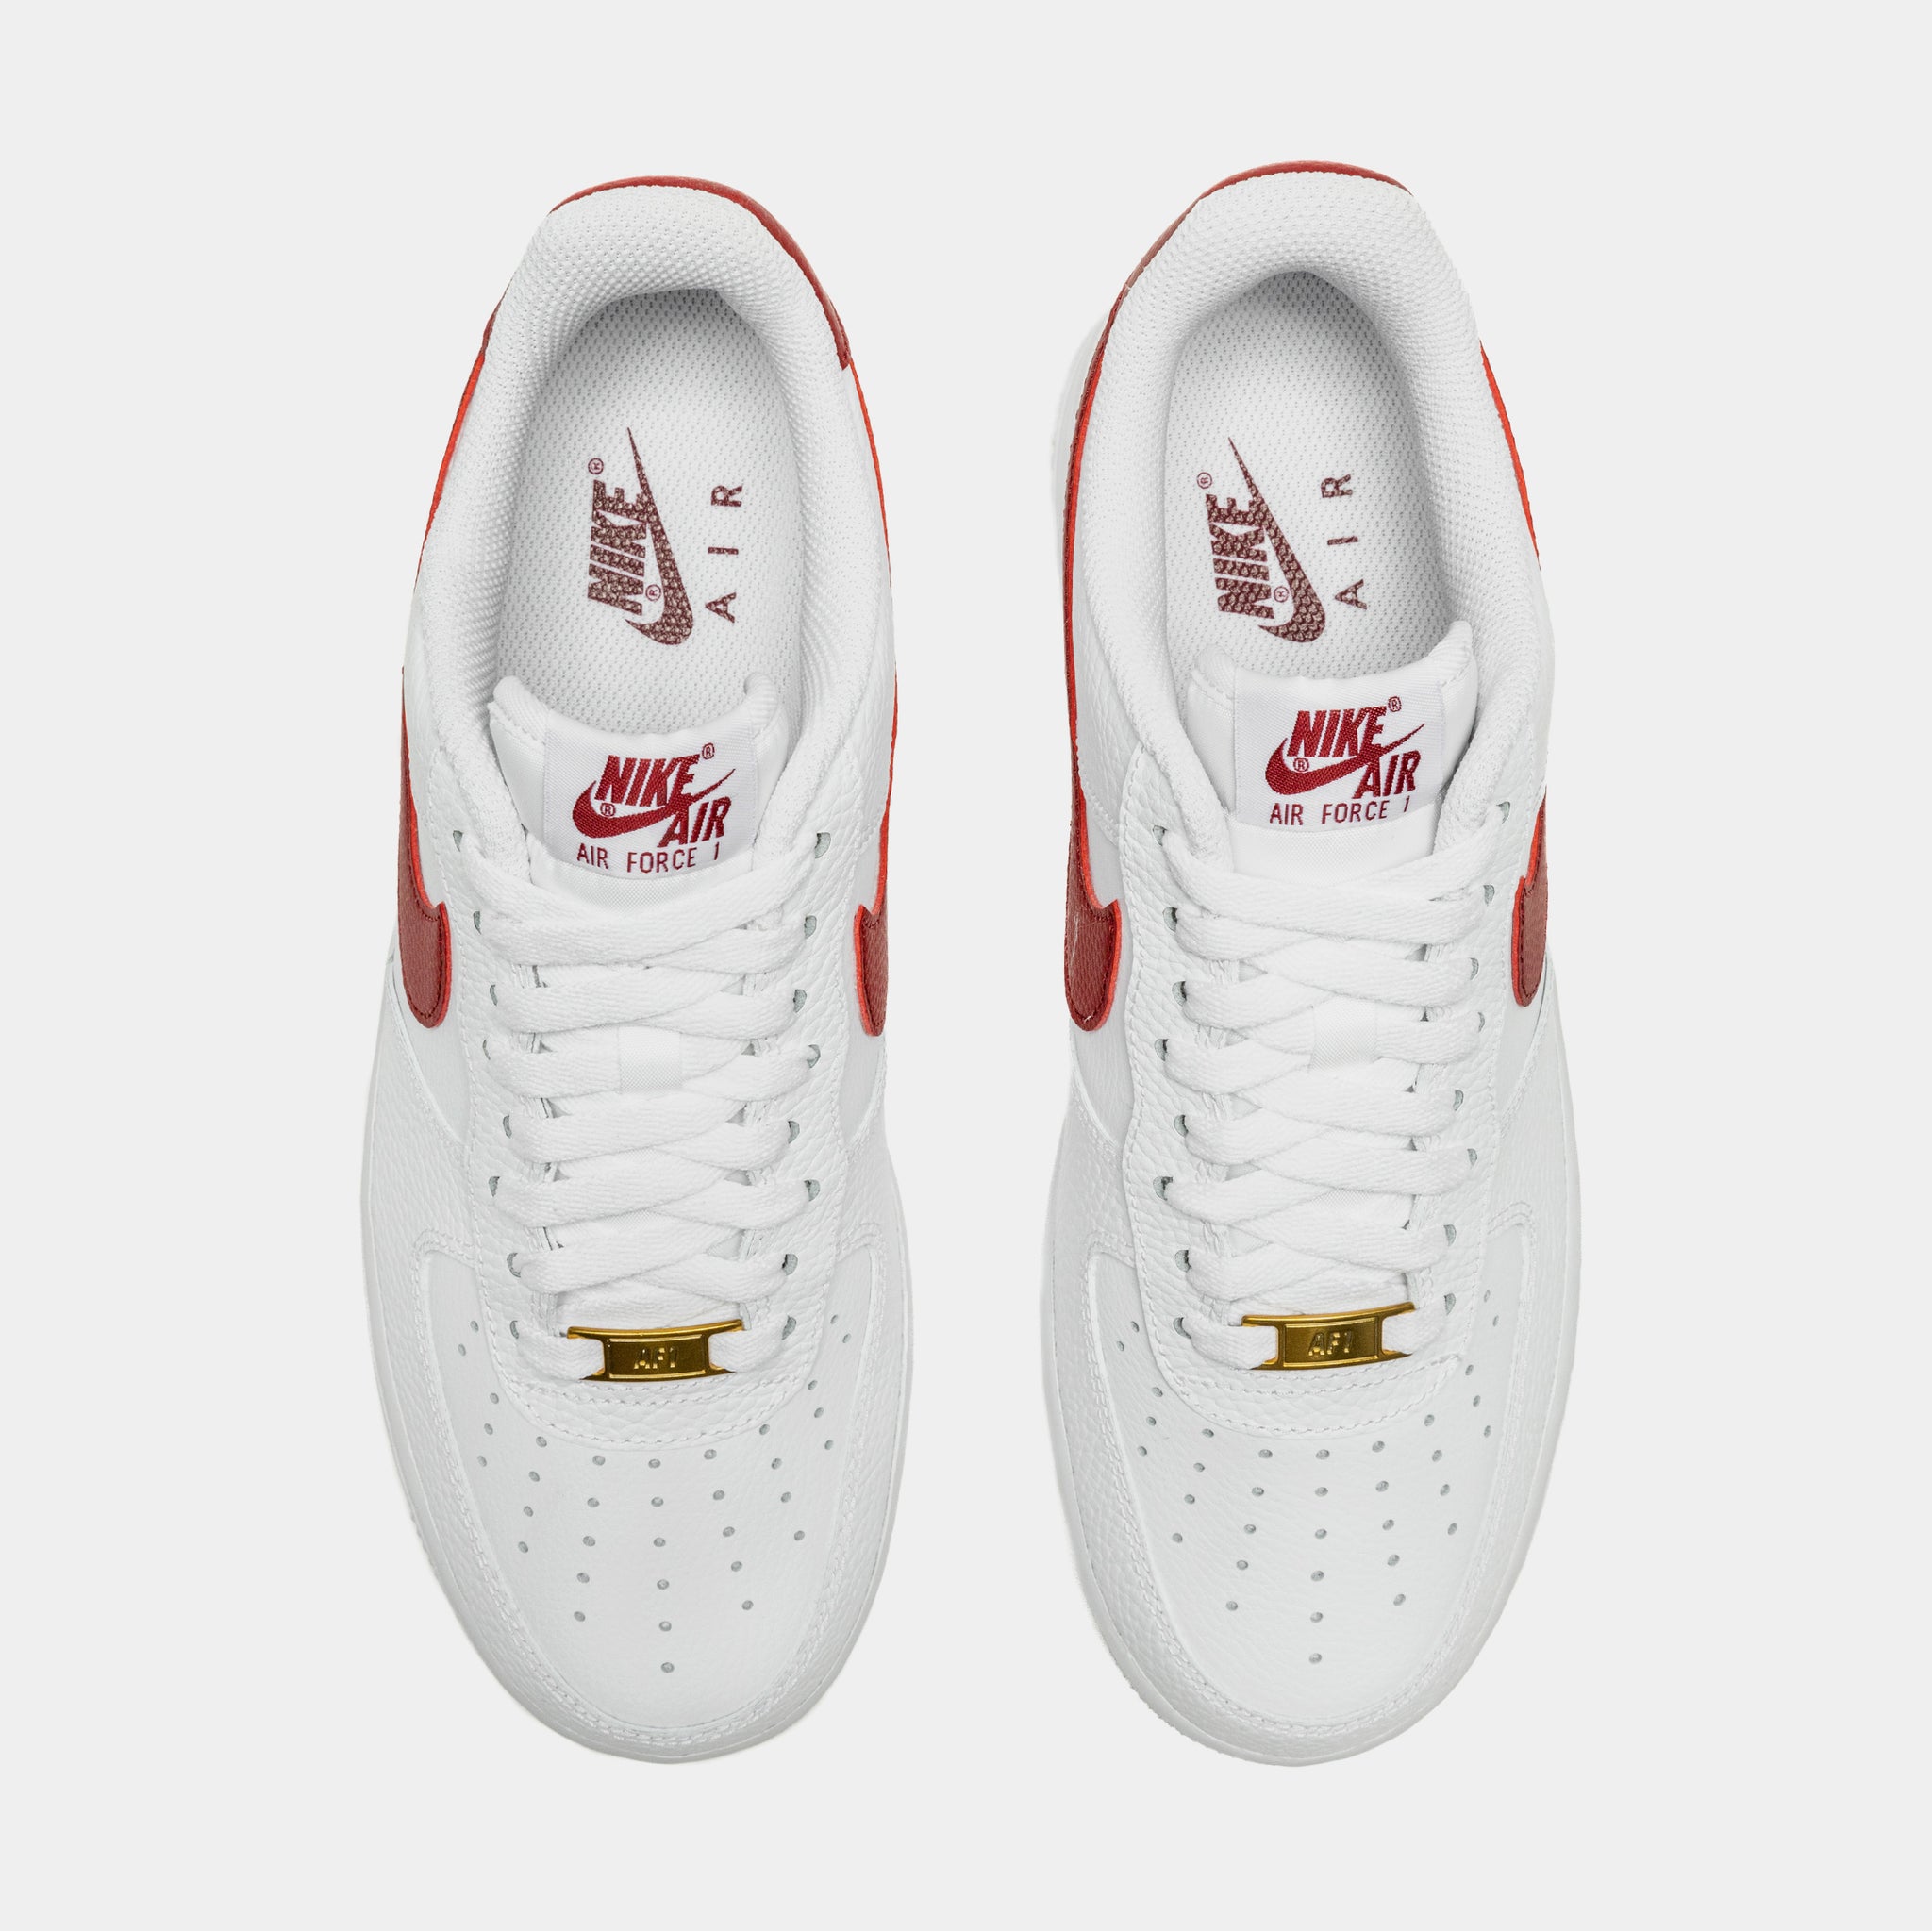 inschakelen Pijnboom aardappel Nike Air Force 1 07 Mens Lifestyle Shoes White Red CZ0326-100 – Shoe Palace